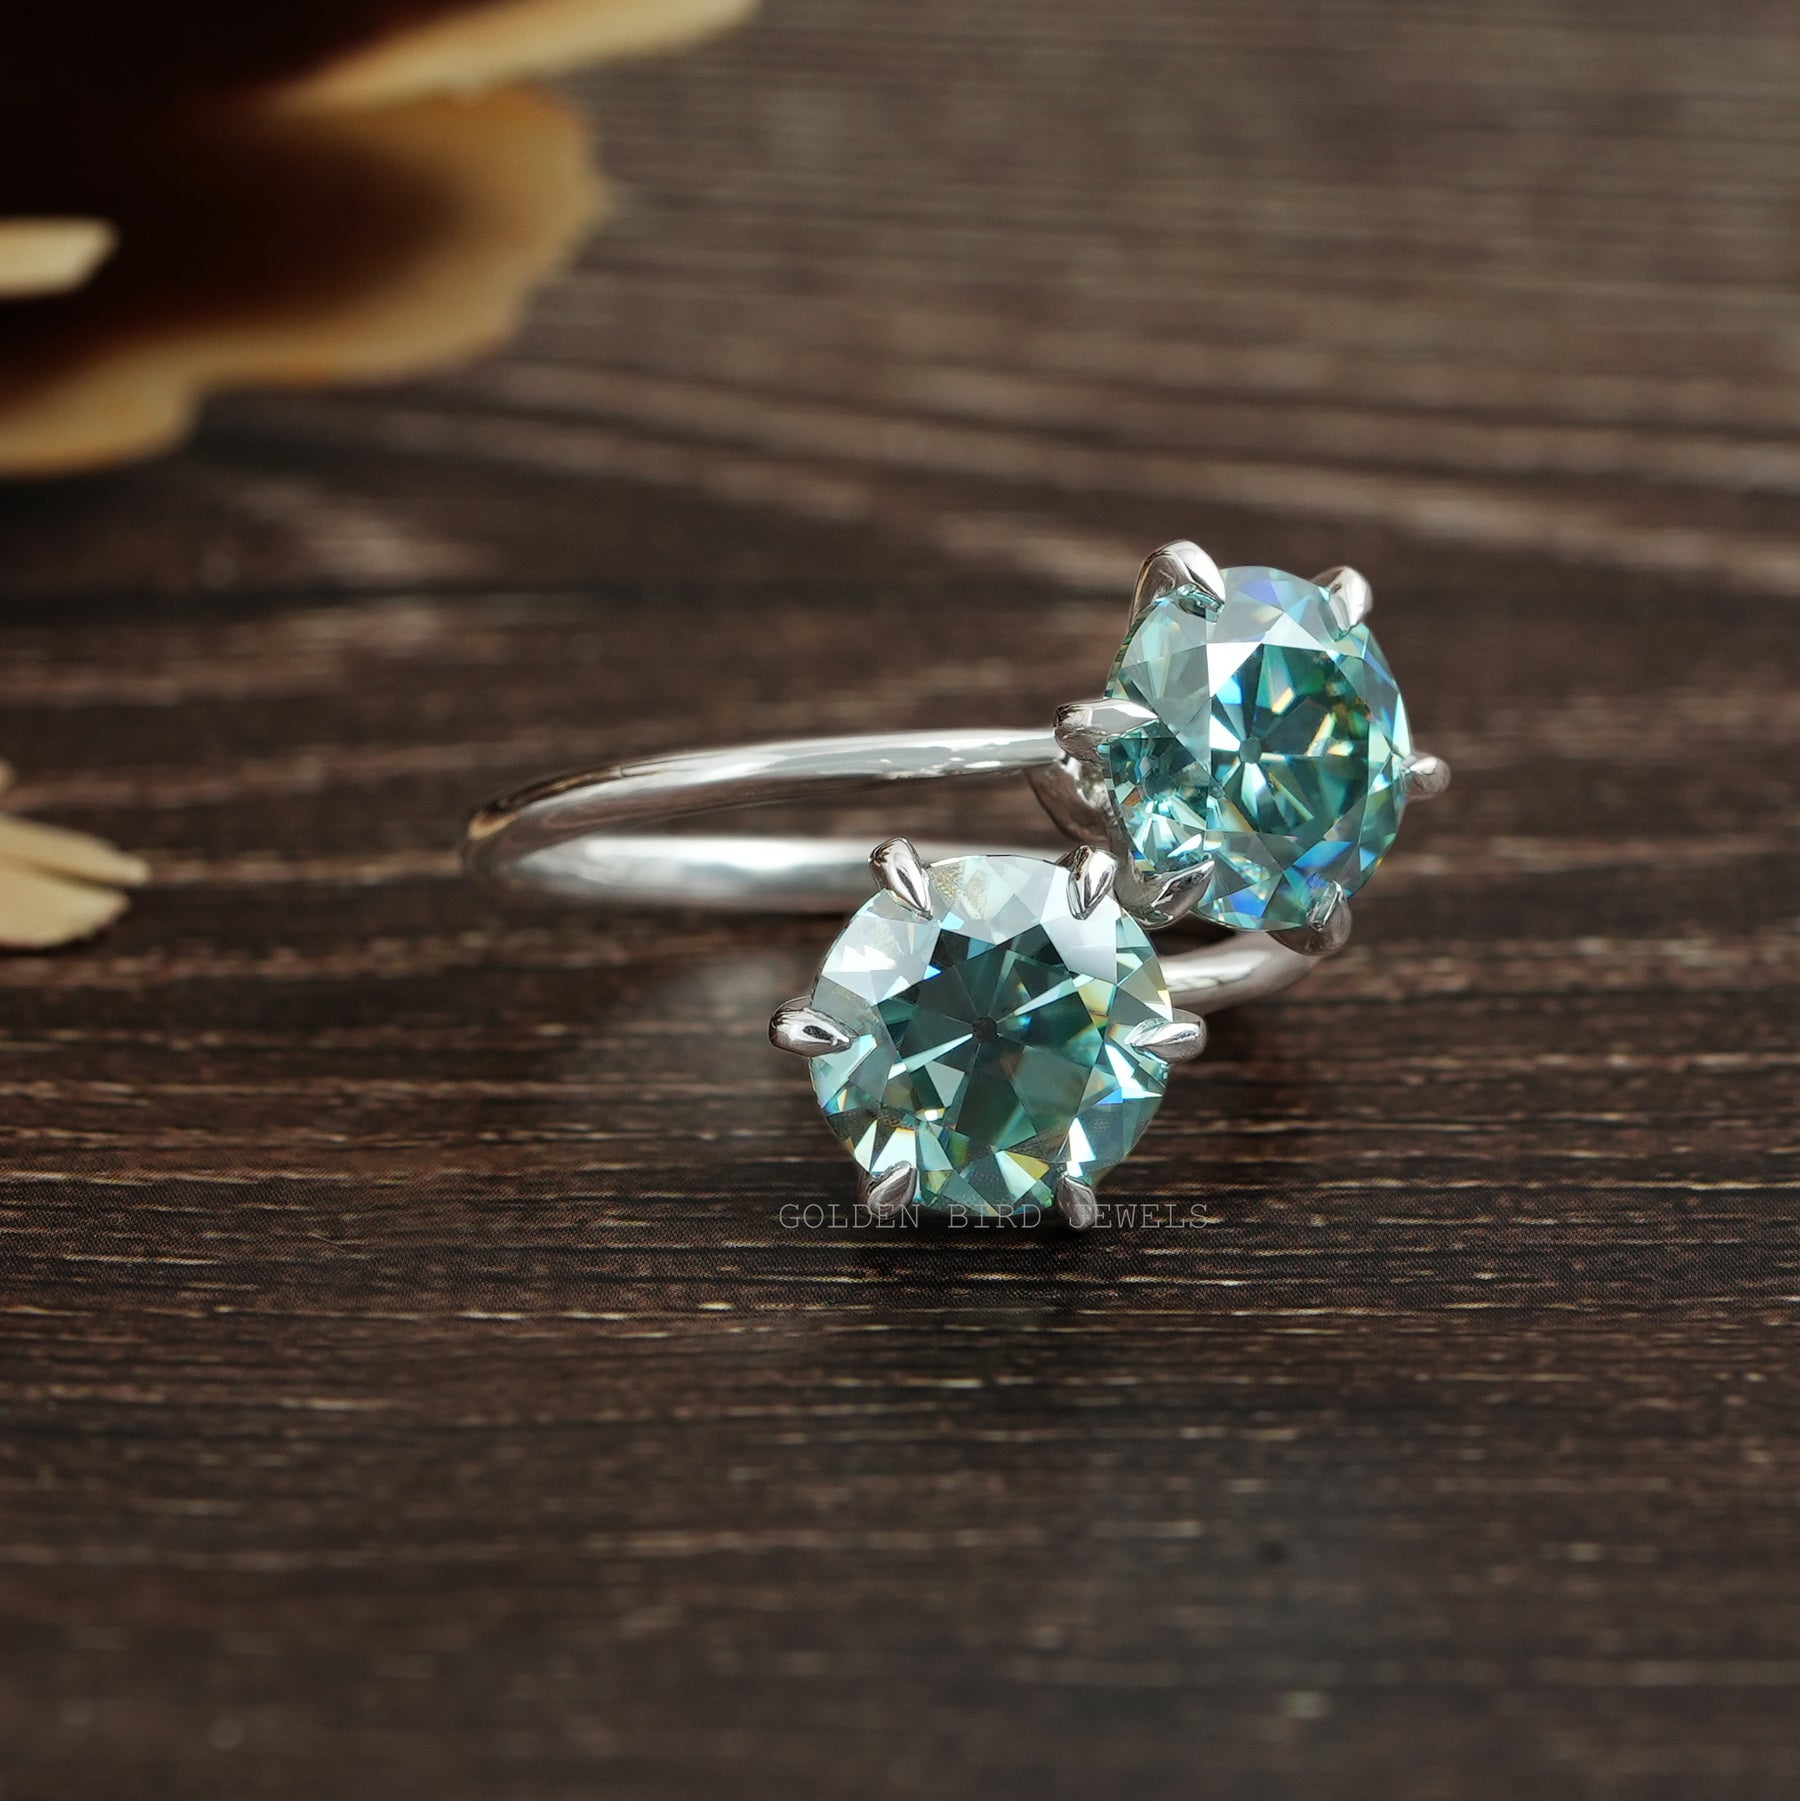 [OEC Blue Round Two Stone Engagement Ring Set In Prongs Setting]-[Golden Bird Jewels]